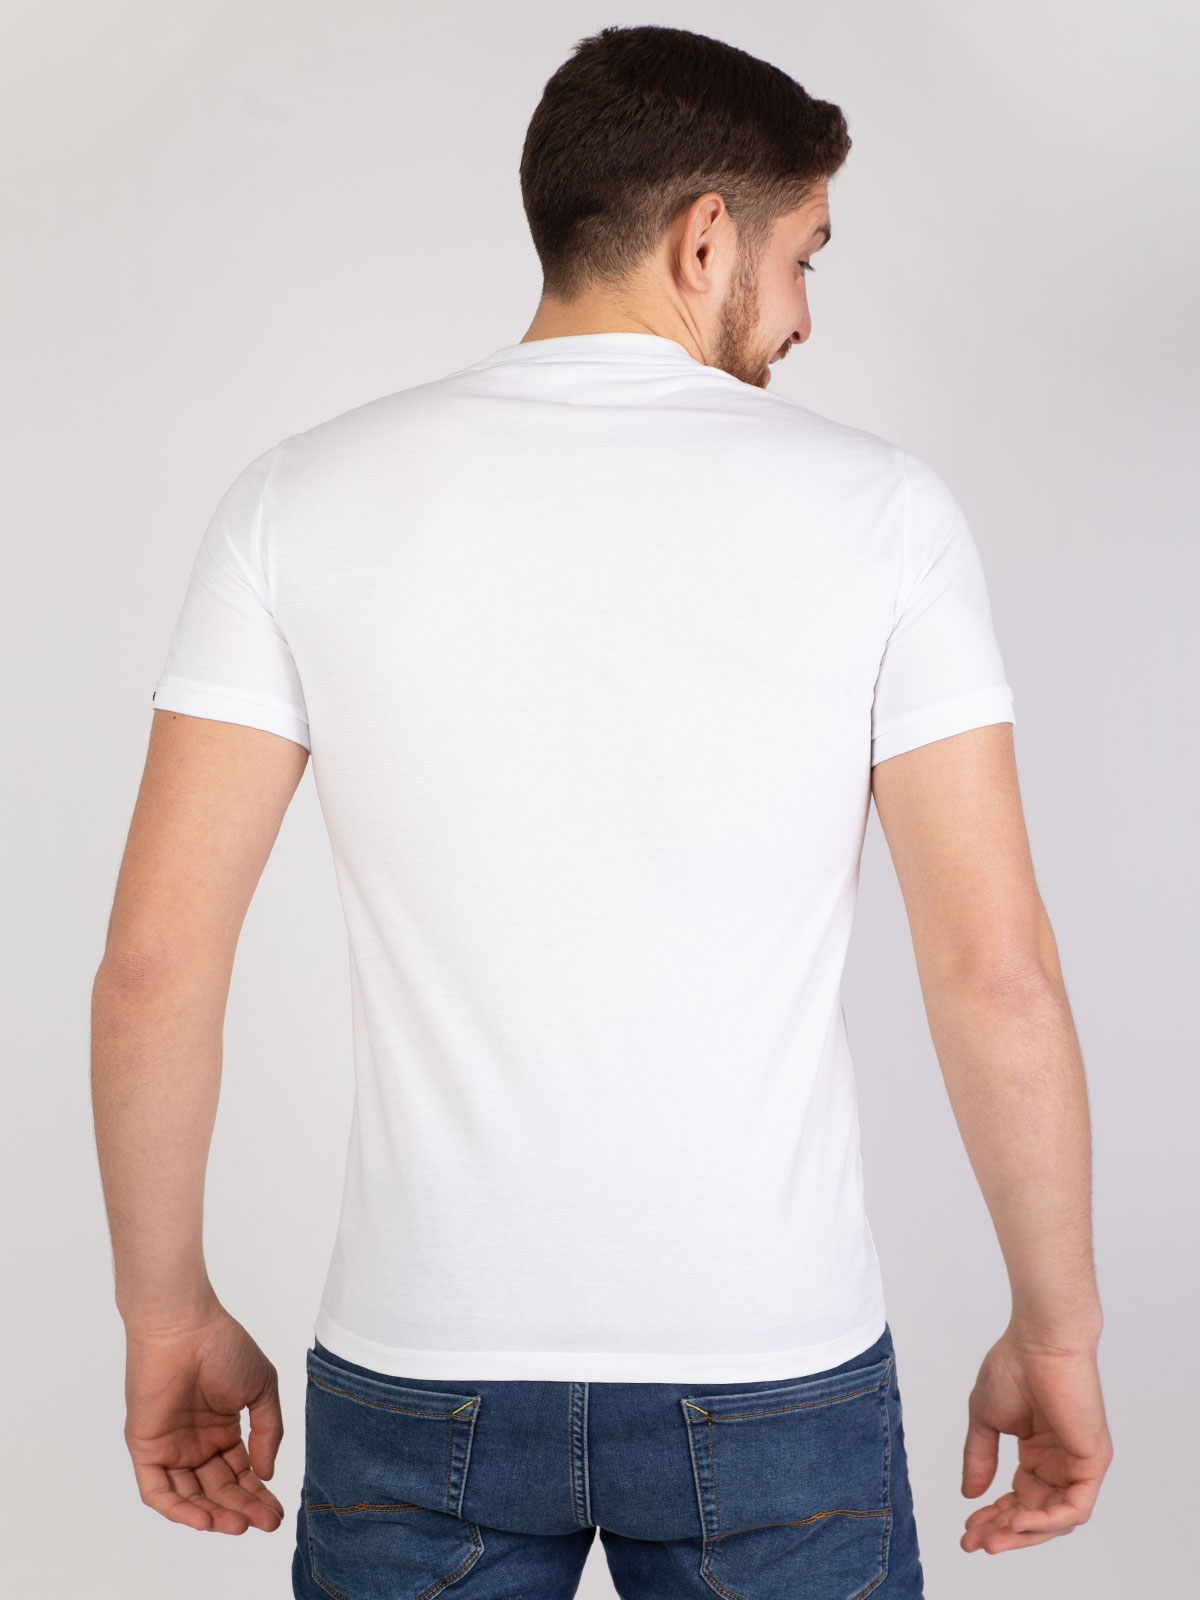 White tshirt with black line on the fro - 96388 € 12.37 img4